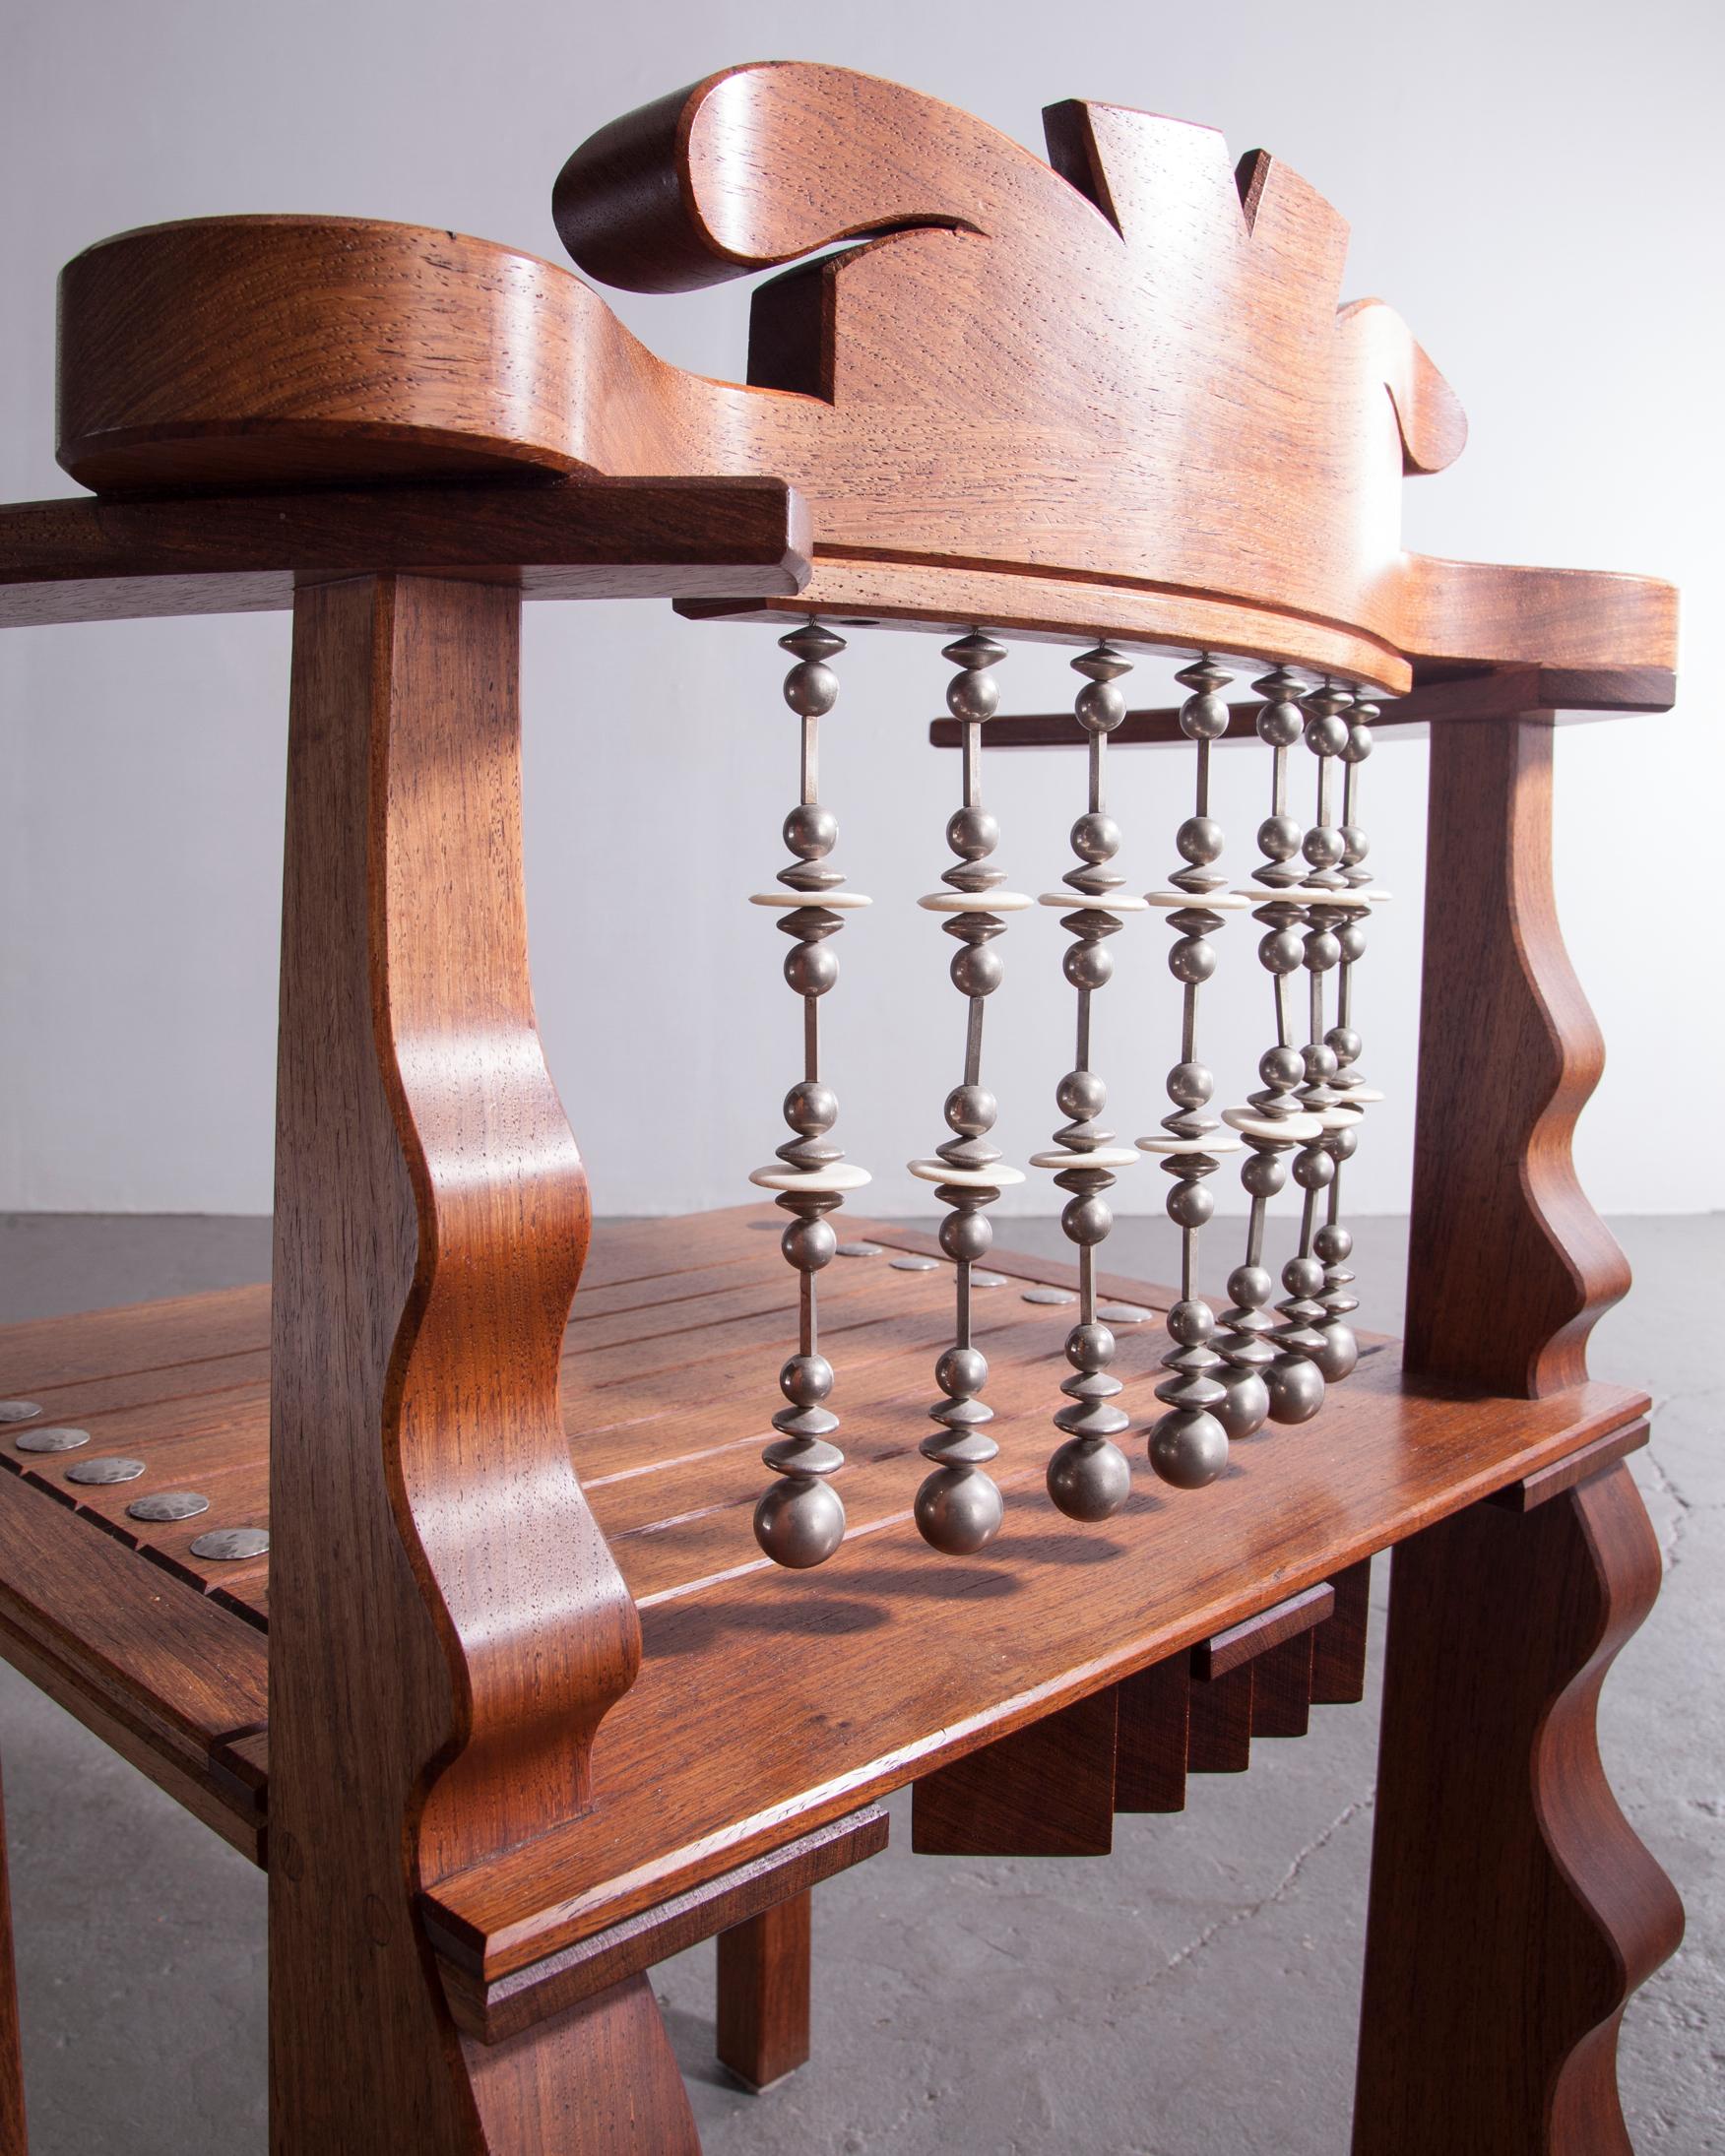 American African Chair in Claro Walnut and Beads by Garry Knox Bennett, 1988